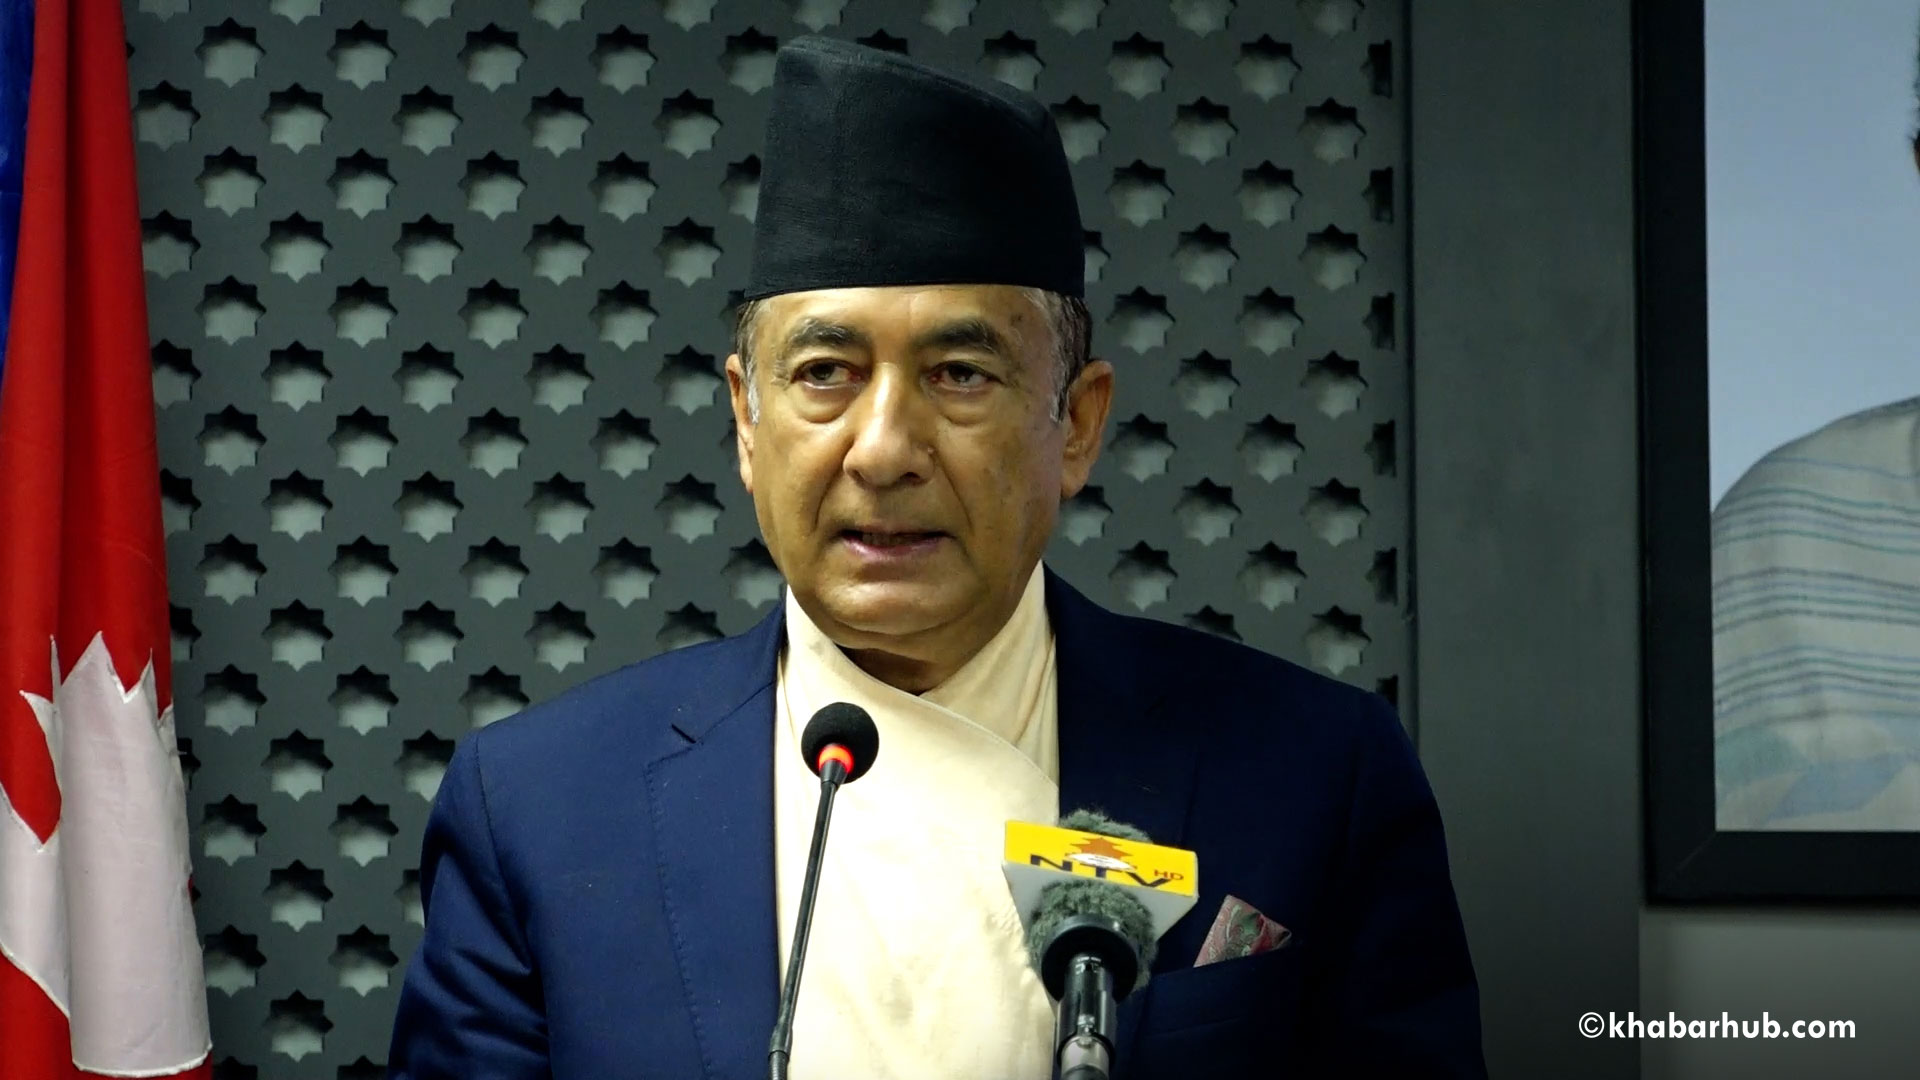 Govt’s Spokesperson Karki brushes off news about mobilization of spies to espionage about Oli